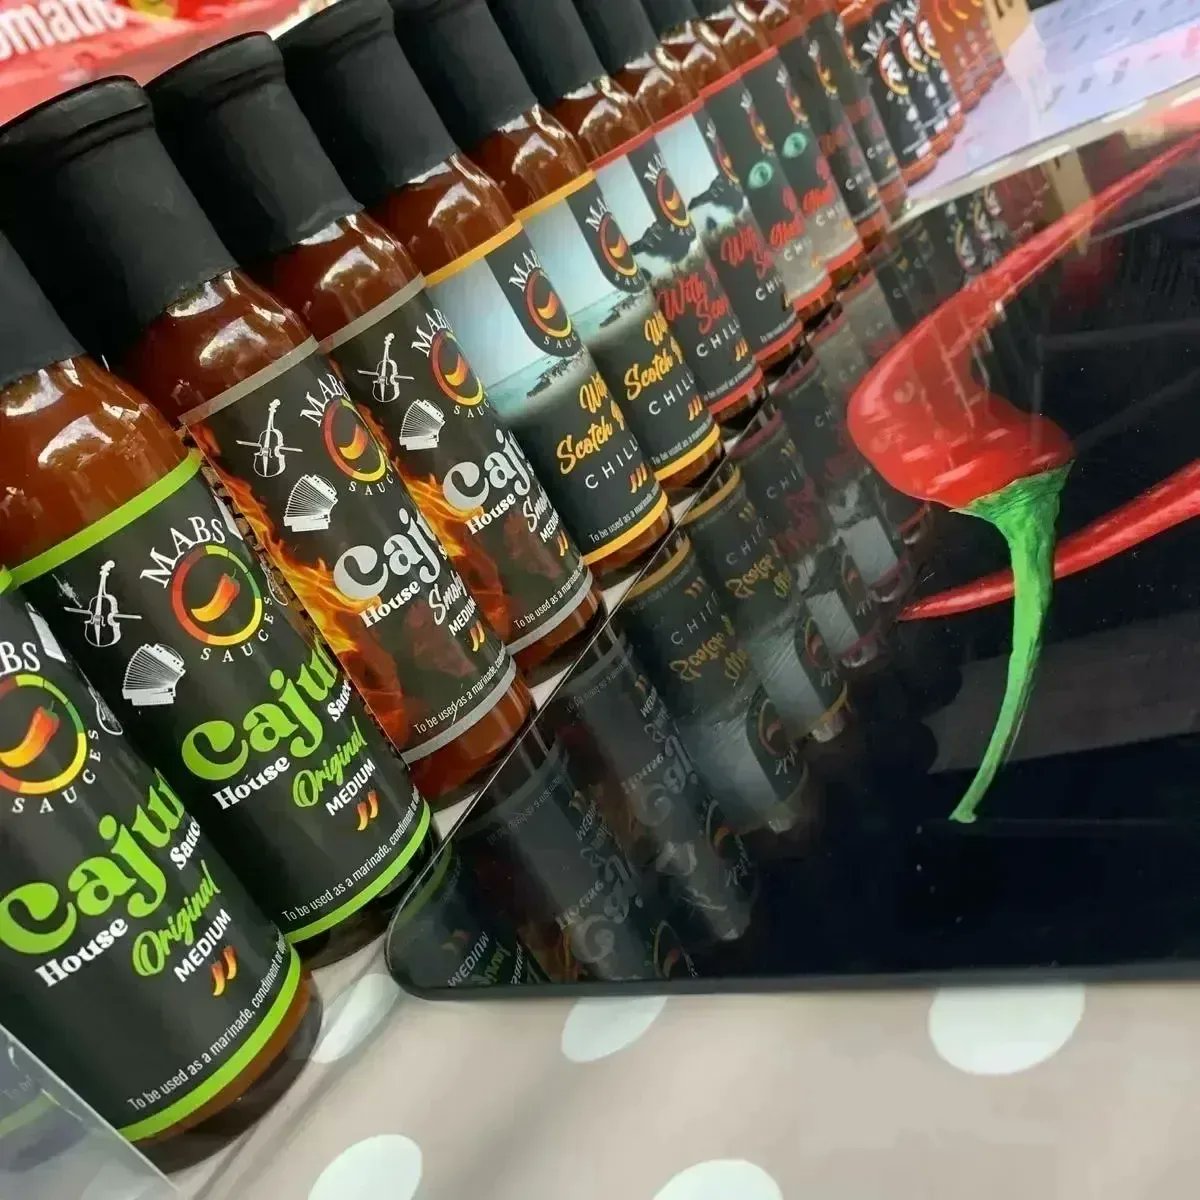 Mabssauces is back at the Aylesford market today.  #reaper #ghost #tablesauces #condiments #marinade #vegan #chillijam #glutenfree #farmersmarket